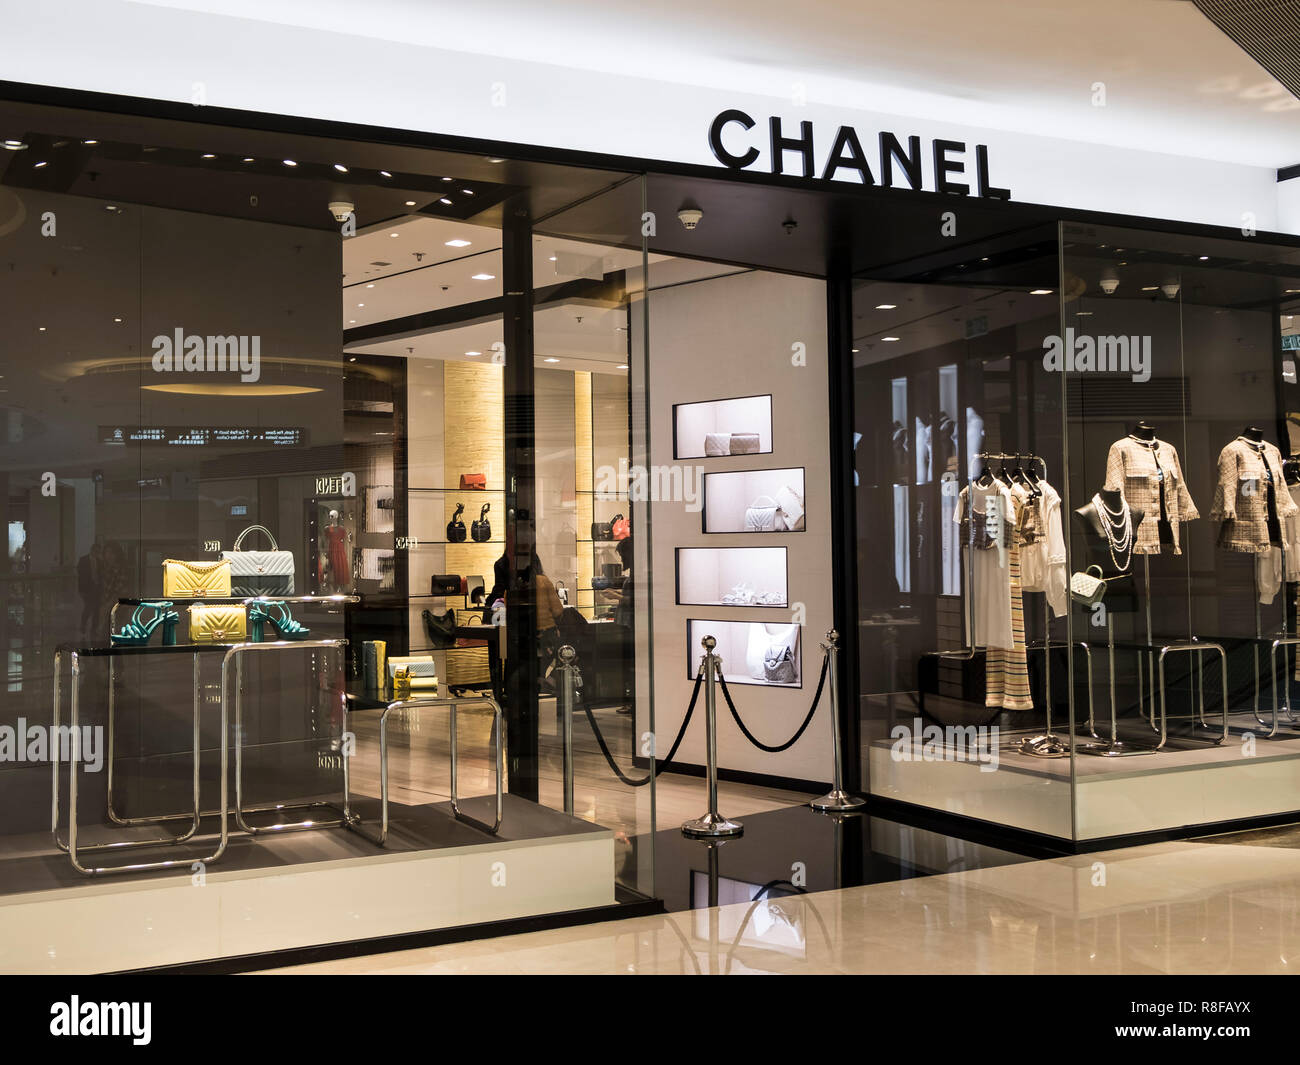 556 Chanel Store Inside Images, Stock Photos, 3D objects, & Vectors